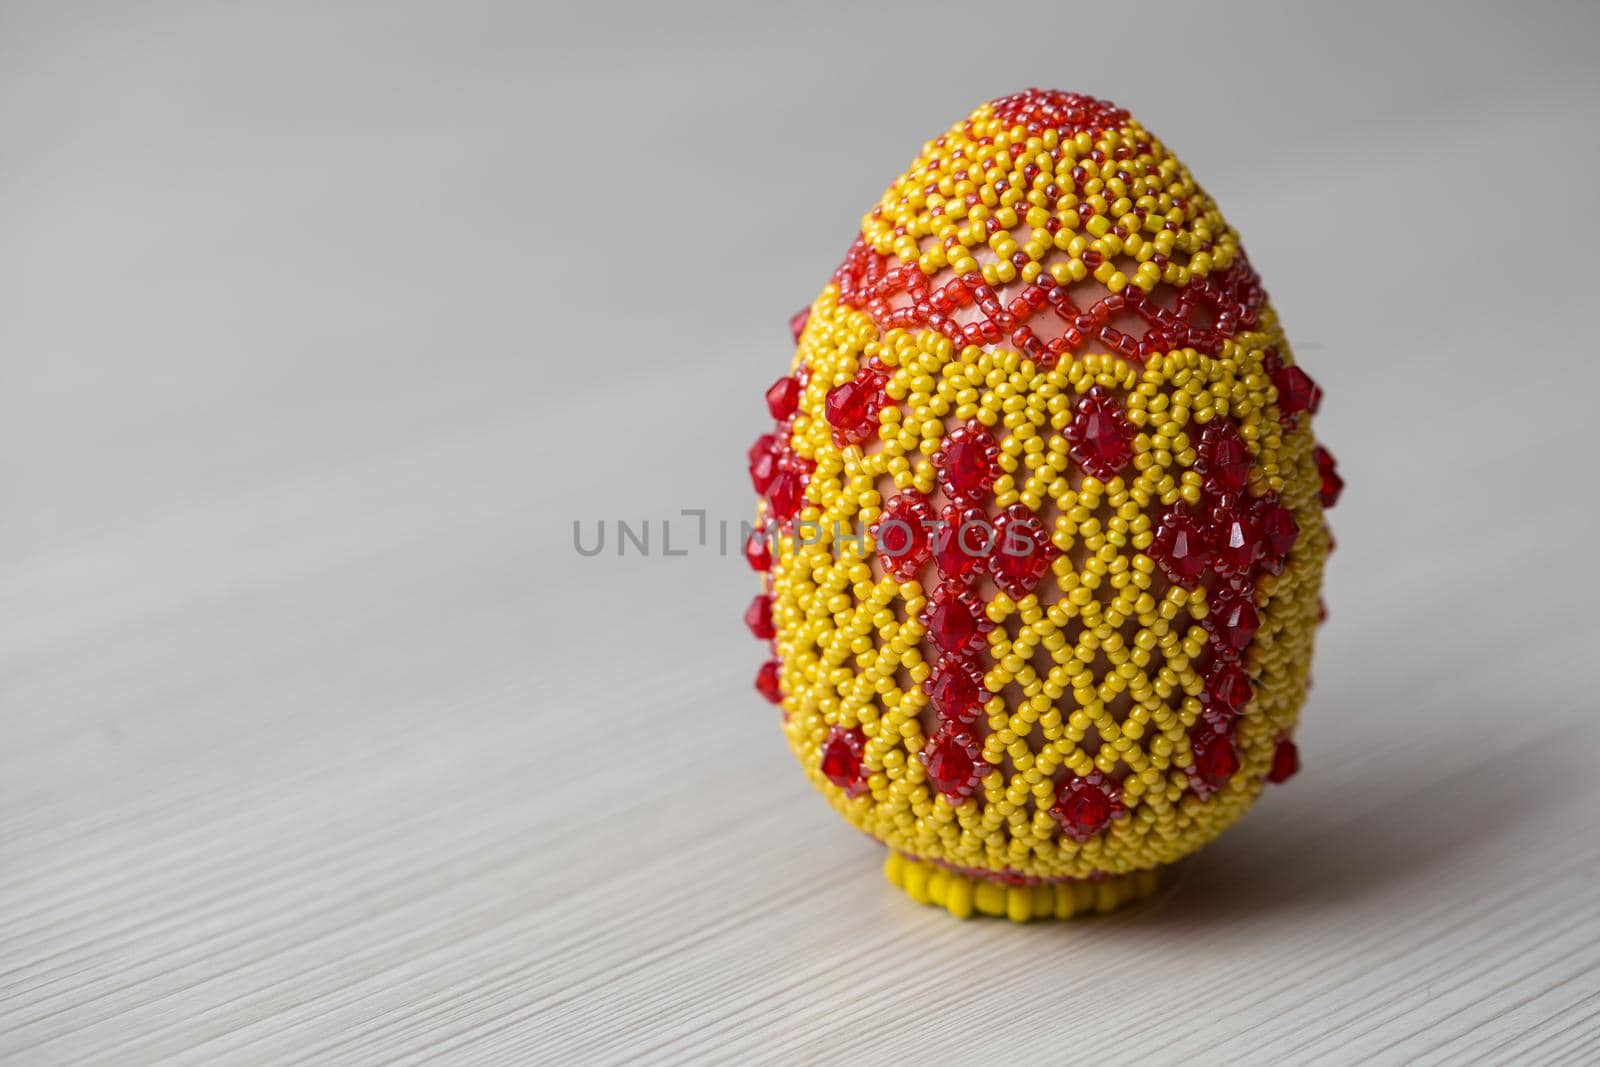 Egg decorated with small beads on a white table